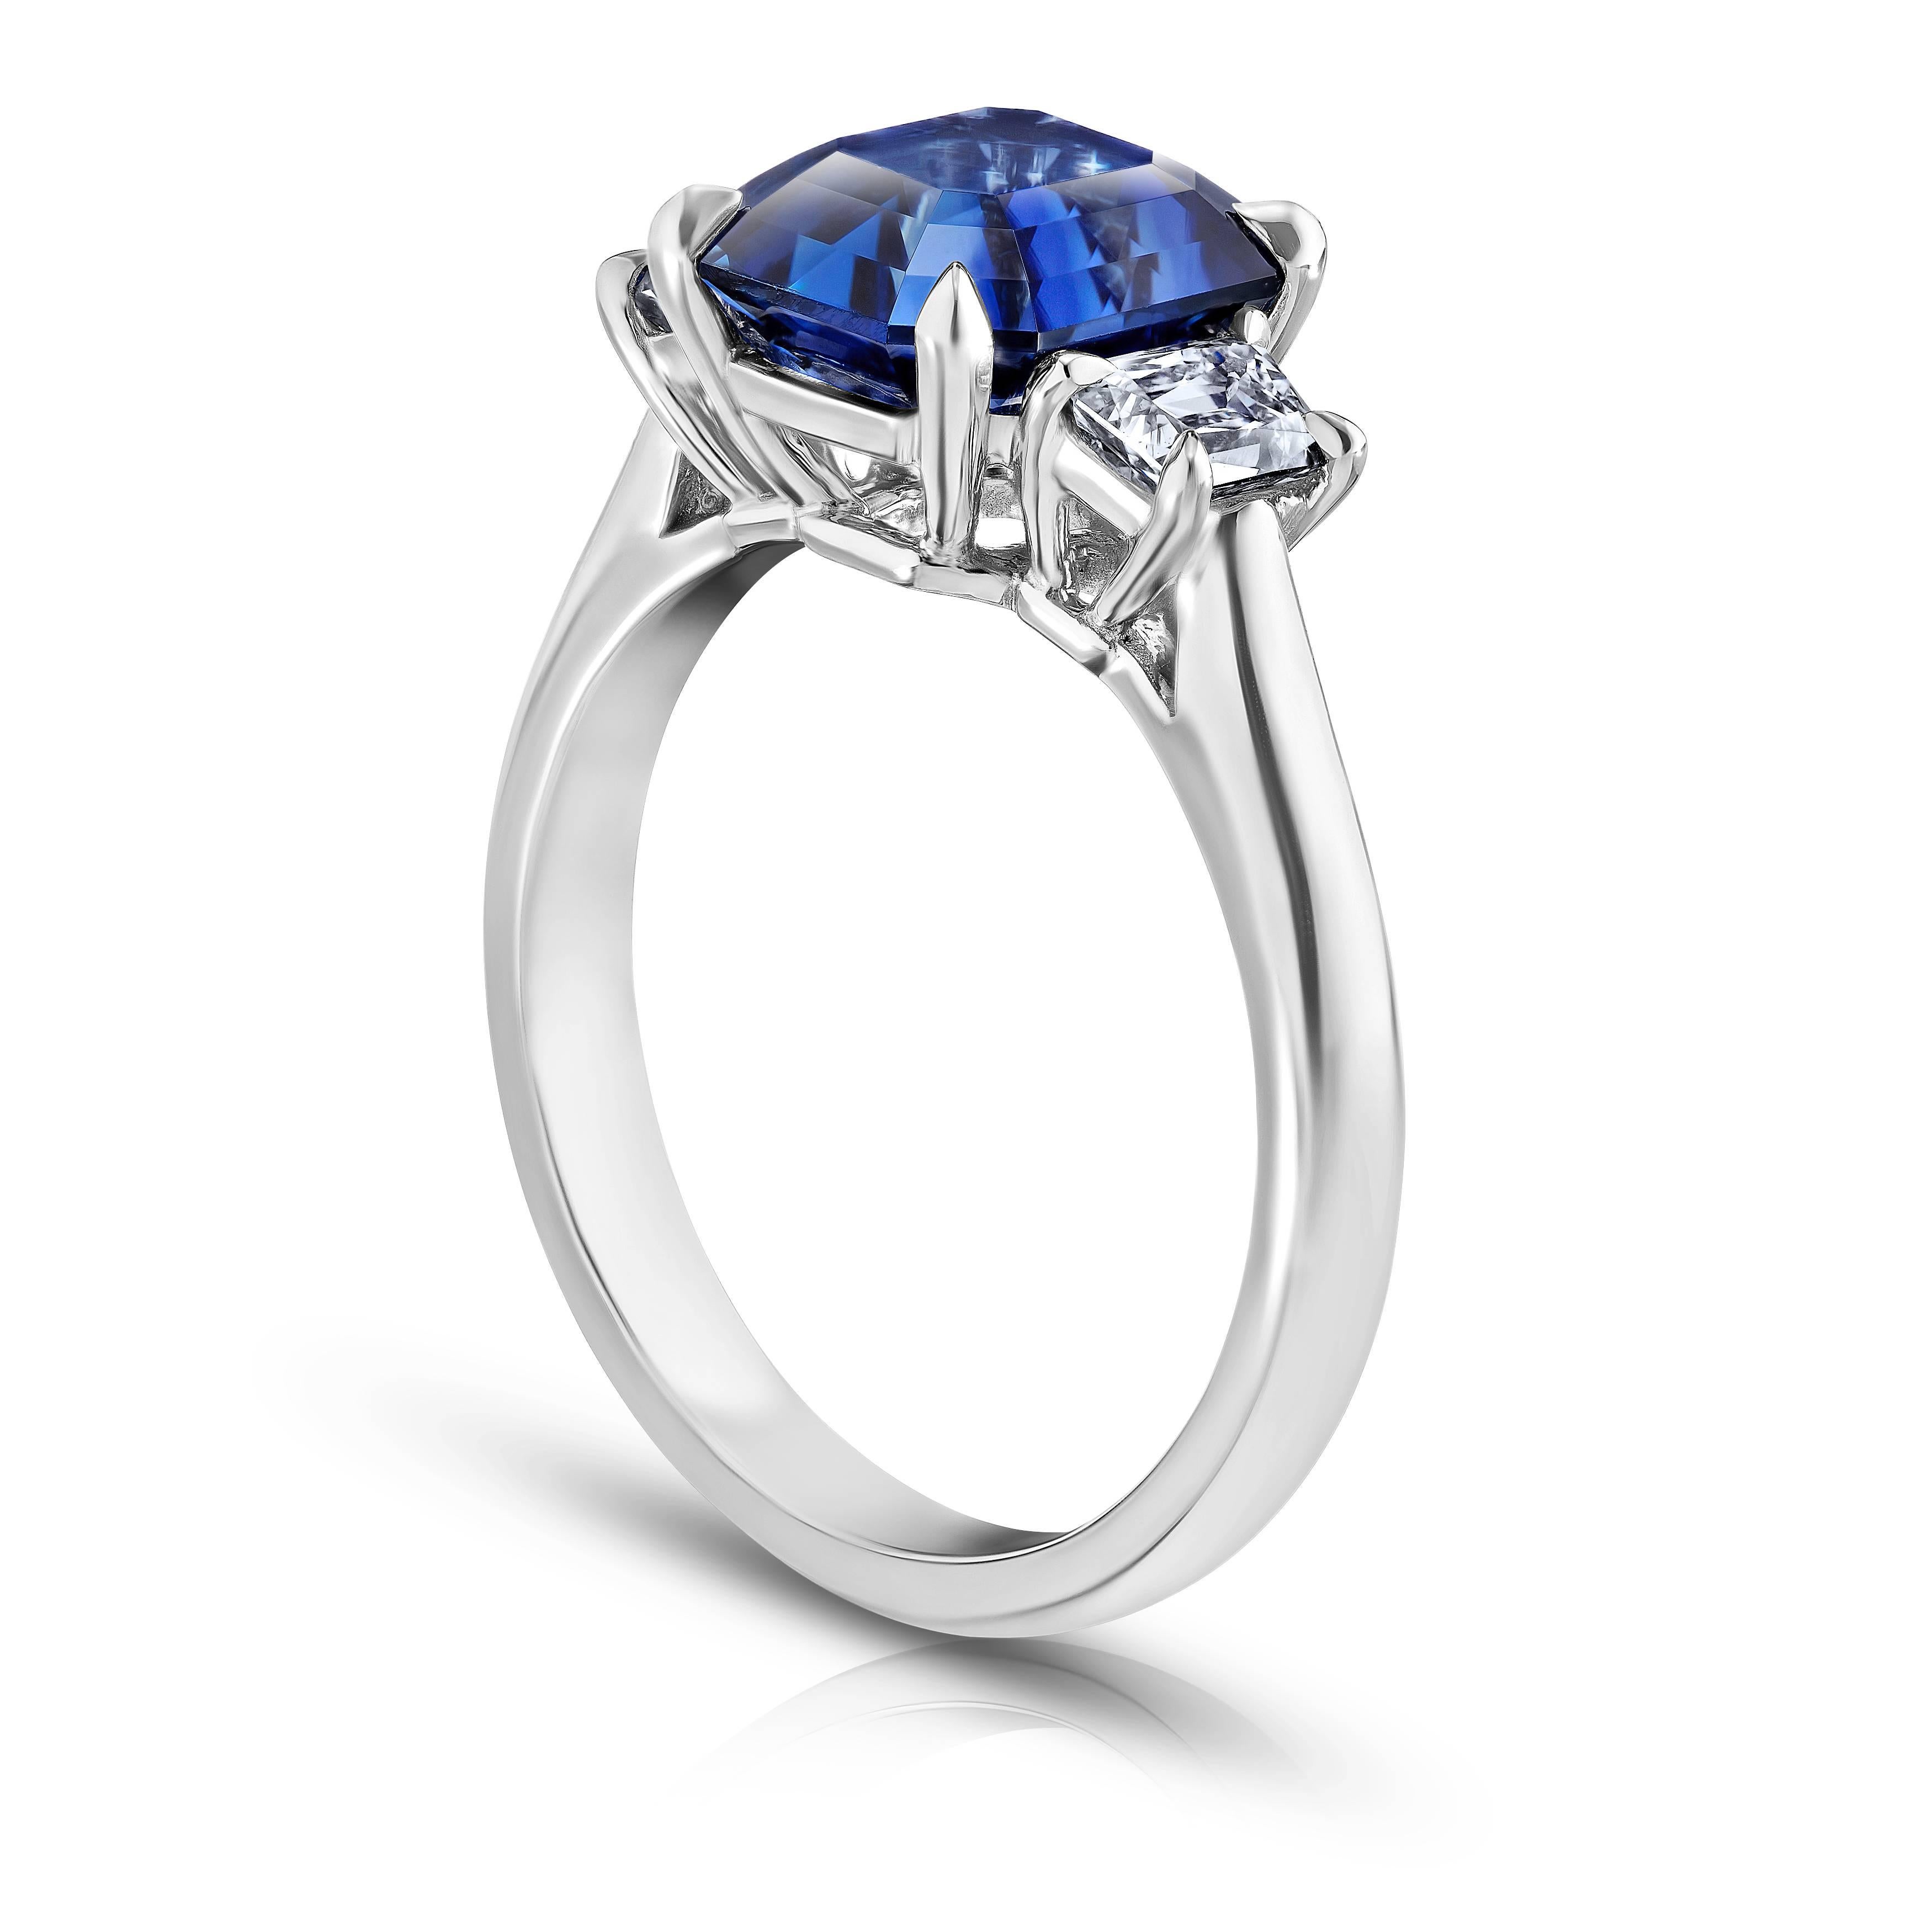 This blue sapphire ring is impeccable. Its center stone is a  emerald cut "cornflour blue" sapphire weighing 3.86 carats. The stone is perfectly cut and extremely clean with great  color saturation. Two trapezoid cut diamonds weighing .62